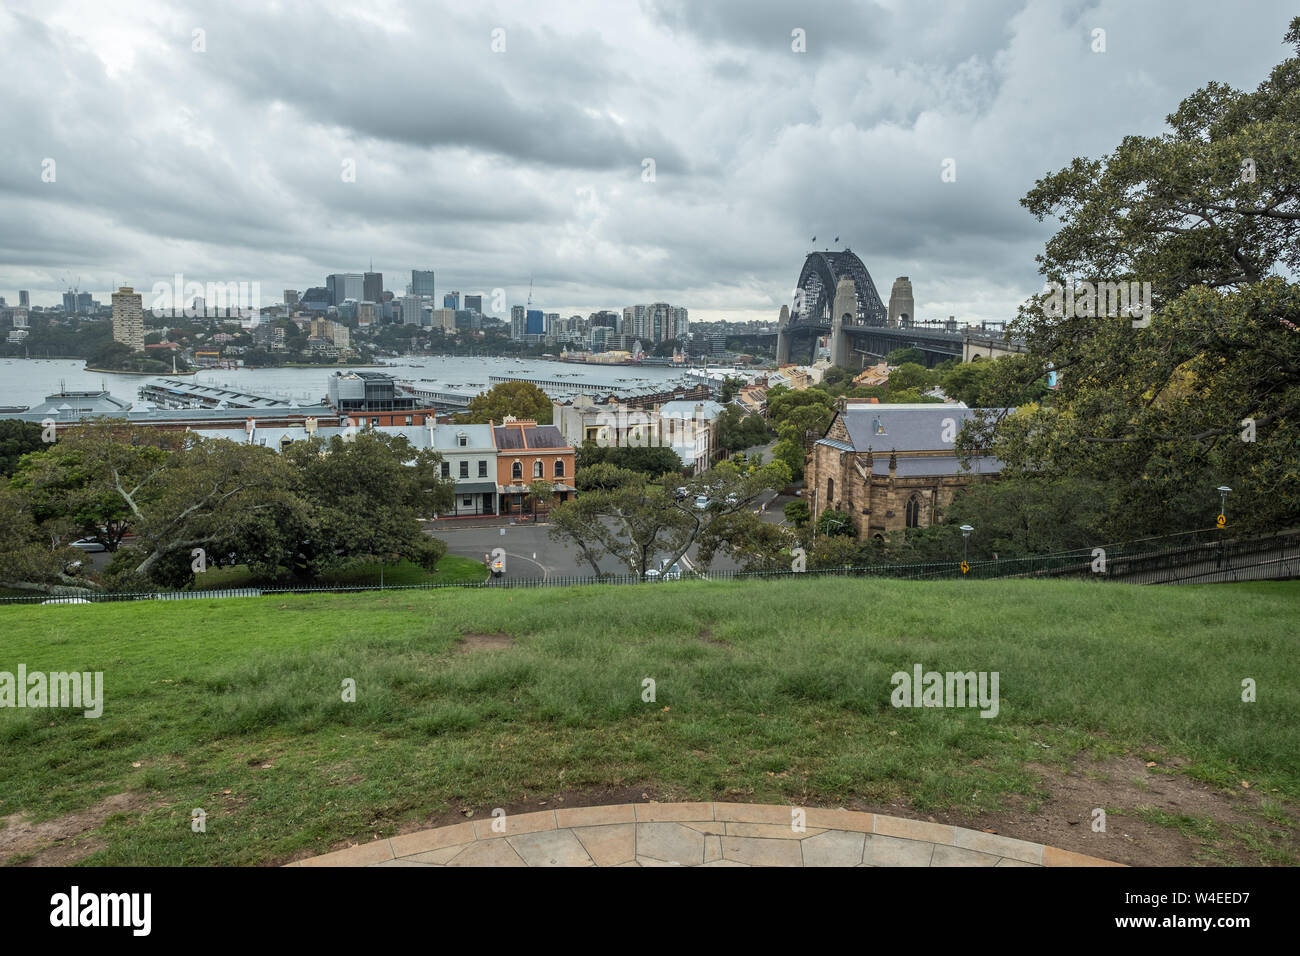 View from Observatory Hill Rotunda, Sydney, Australia looking down over The Rocks and Sydney Harbour Bridge Stock Photo